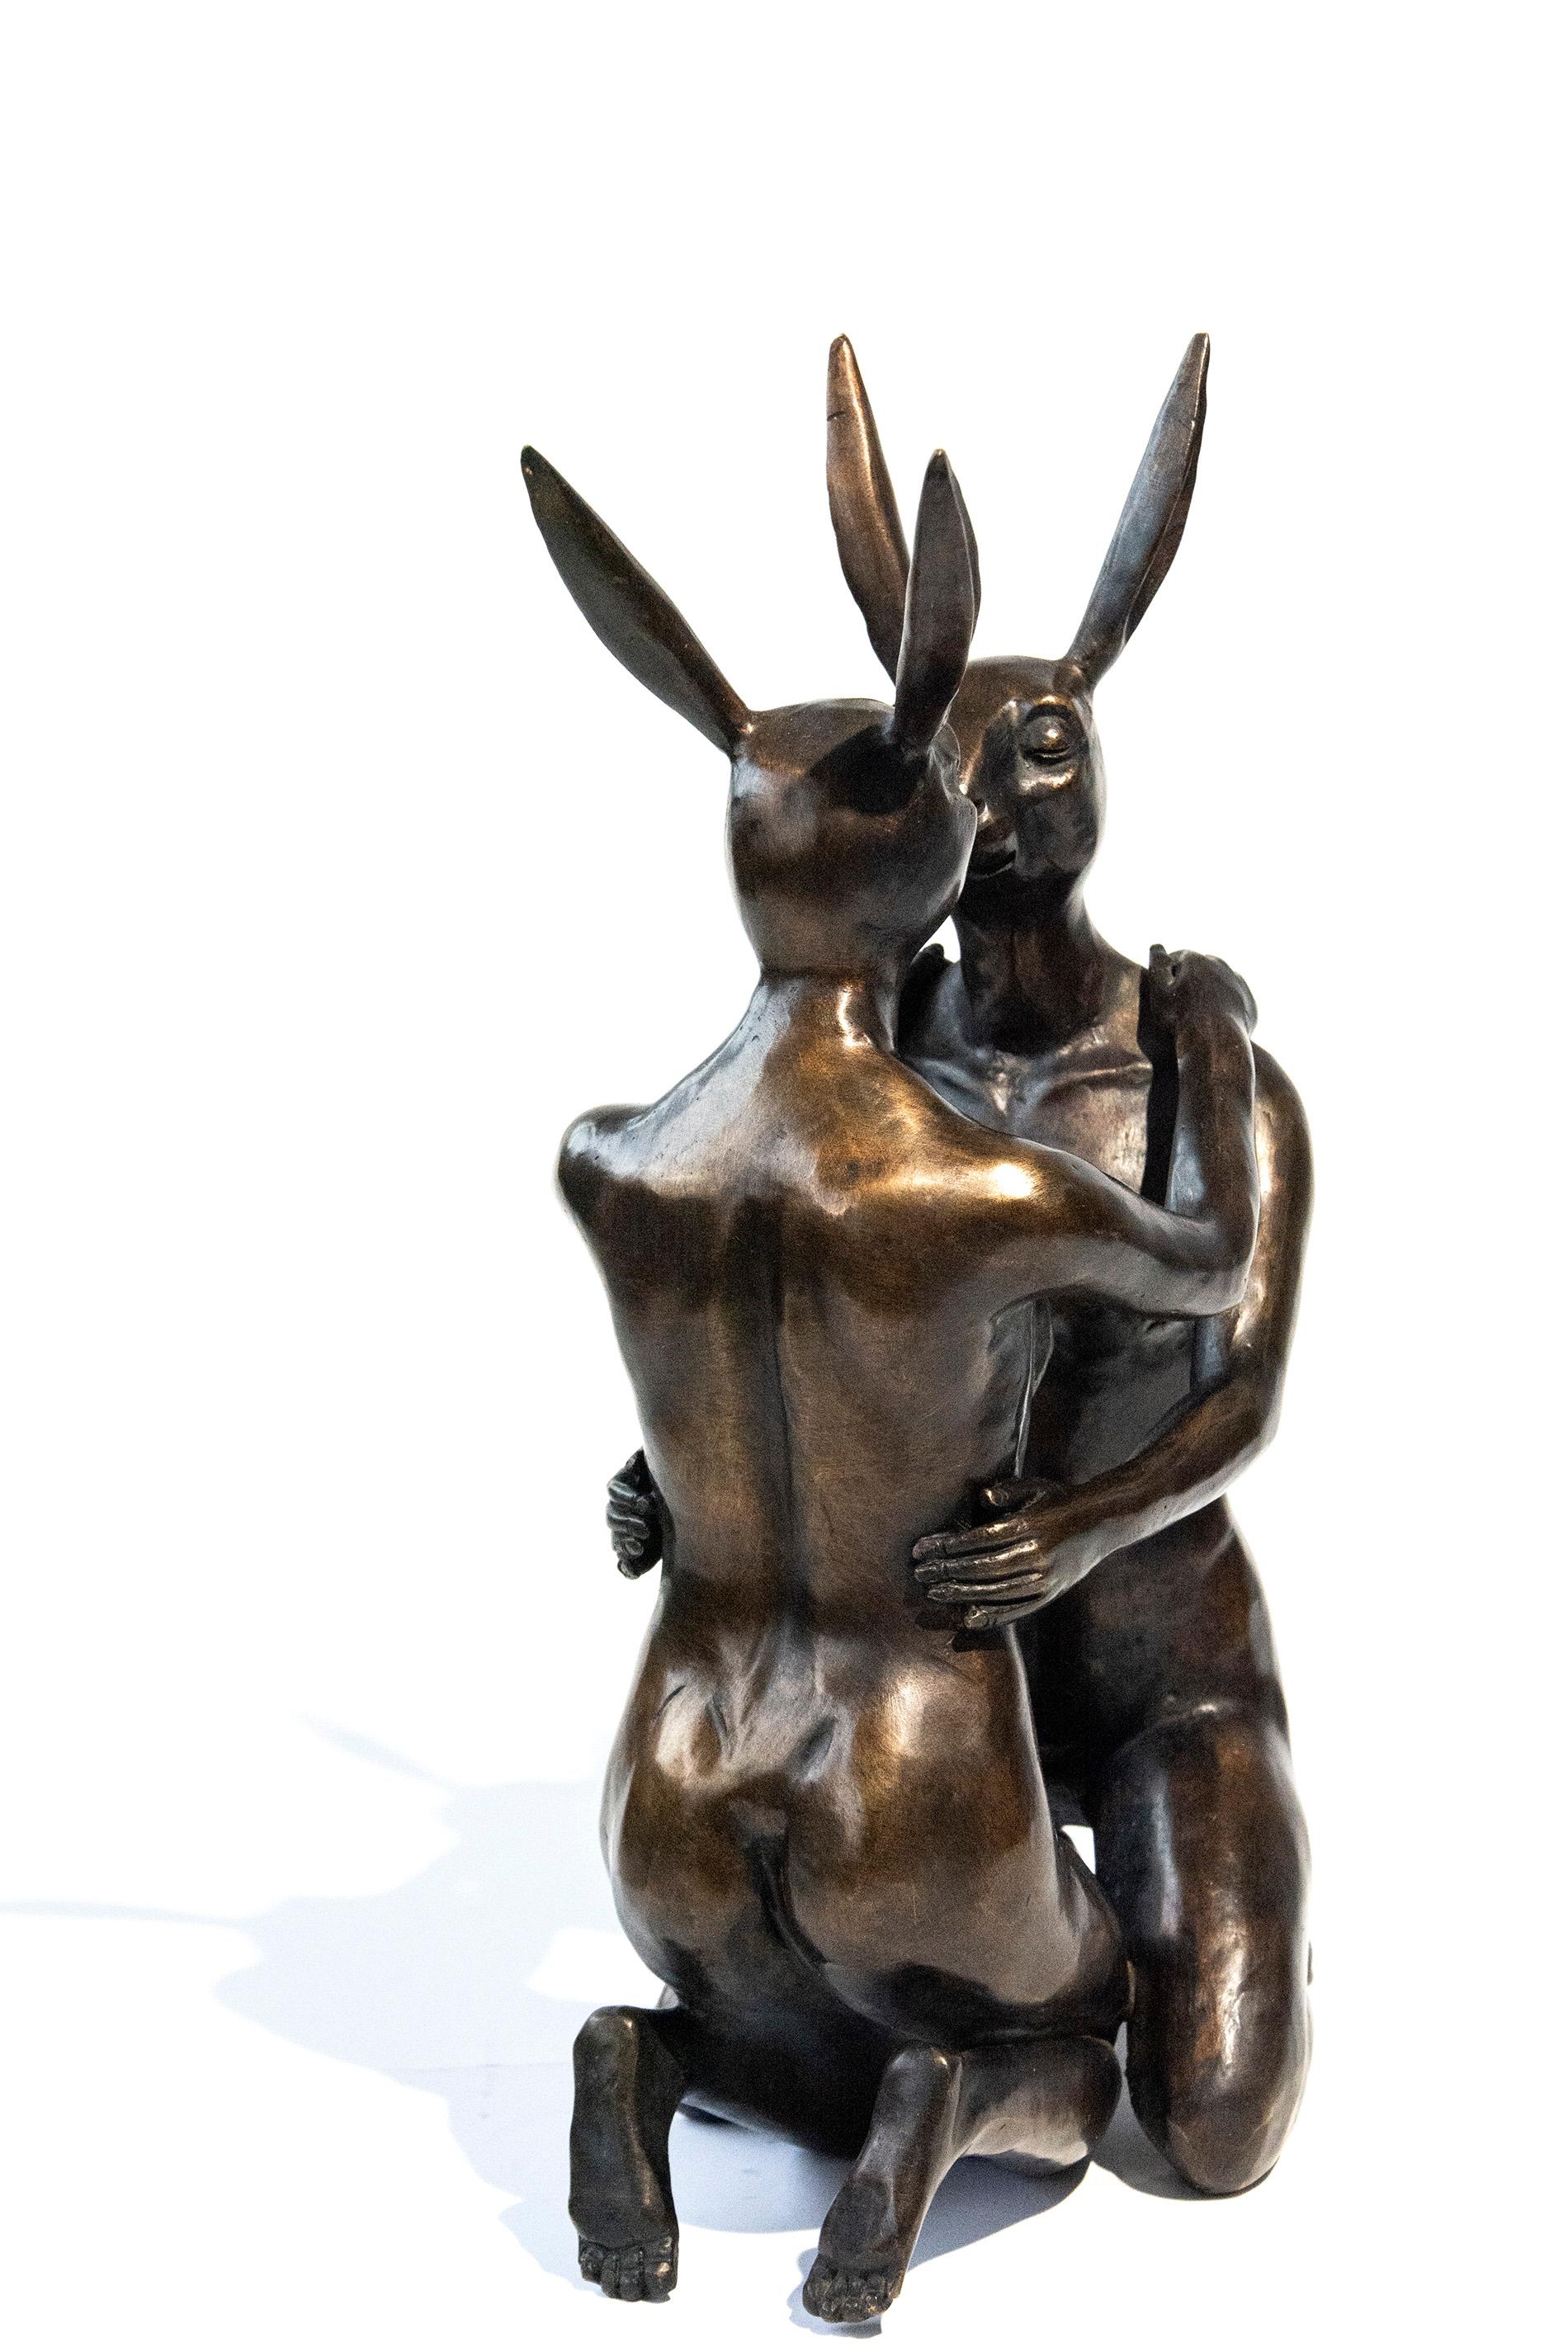 The narrative of love takes many forms in this bronze Gillie and Marc sculpture. Sculpture weighs approx. 12.5 lbs. The artists' names and edition number, 12/30, are stamped into the sculpture and painted gold. 

The Australian artistic duo Gillie